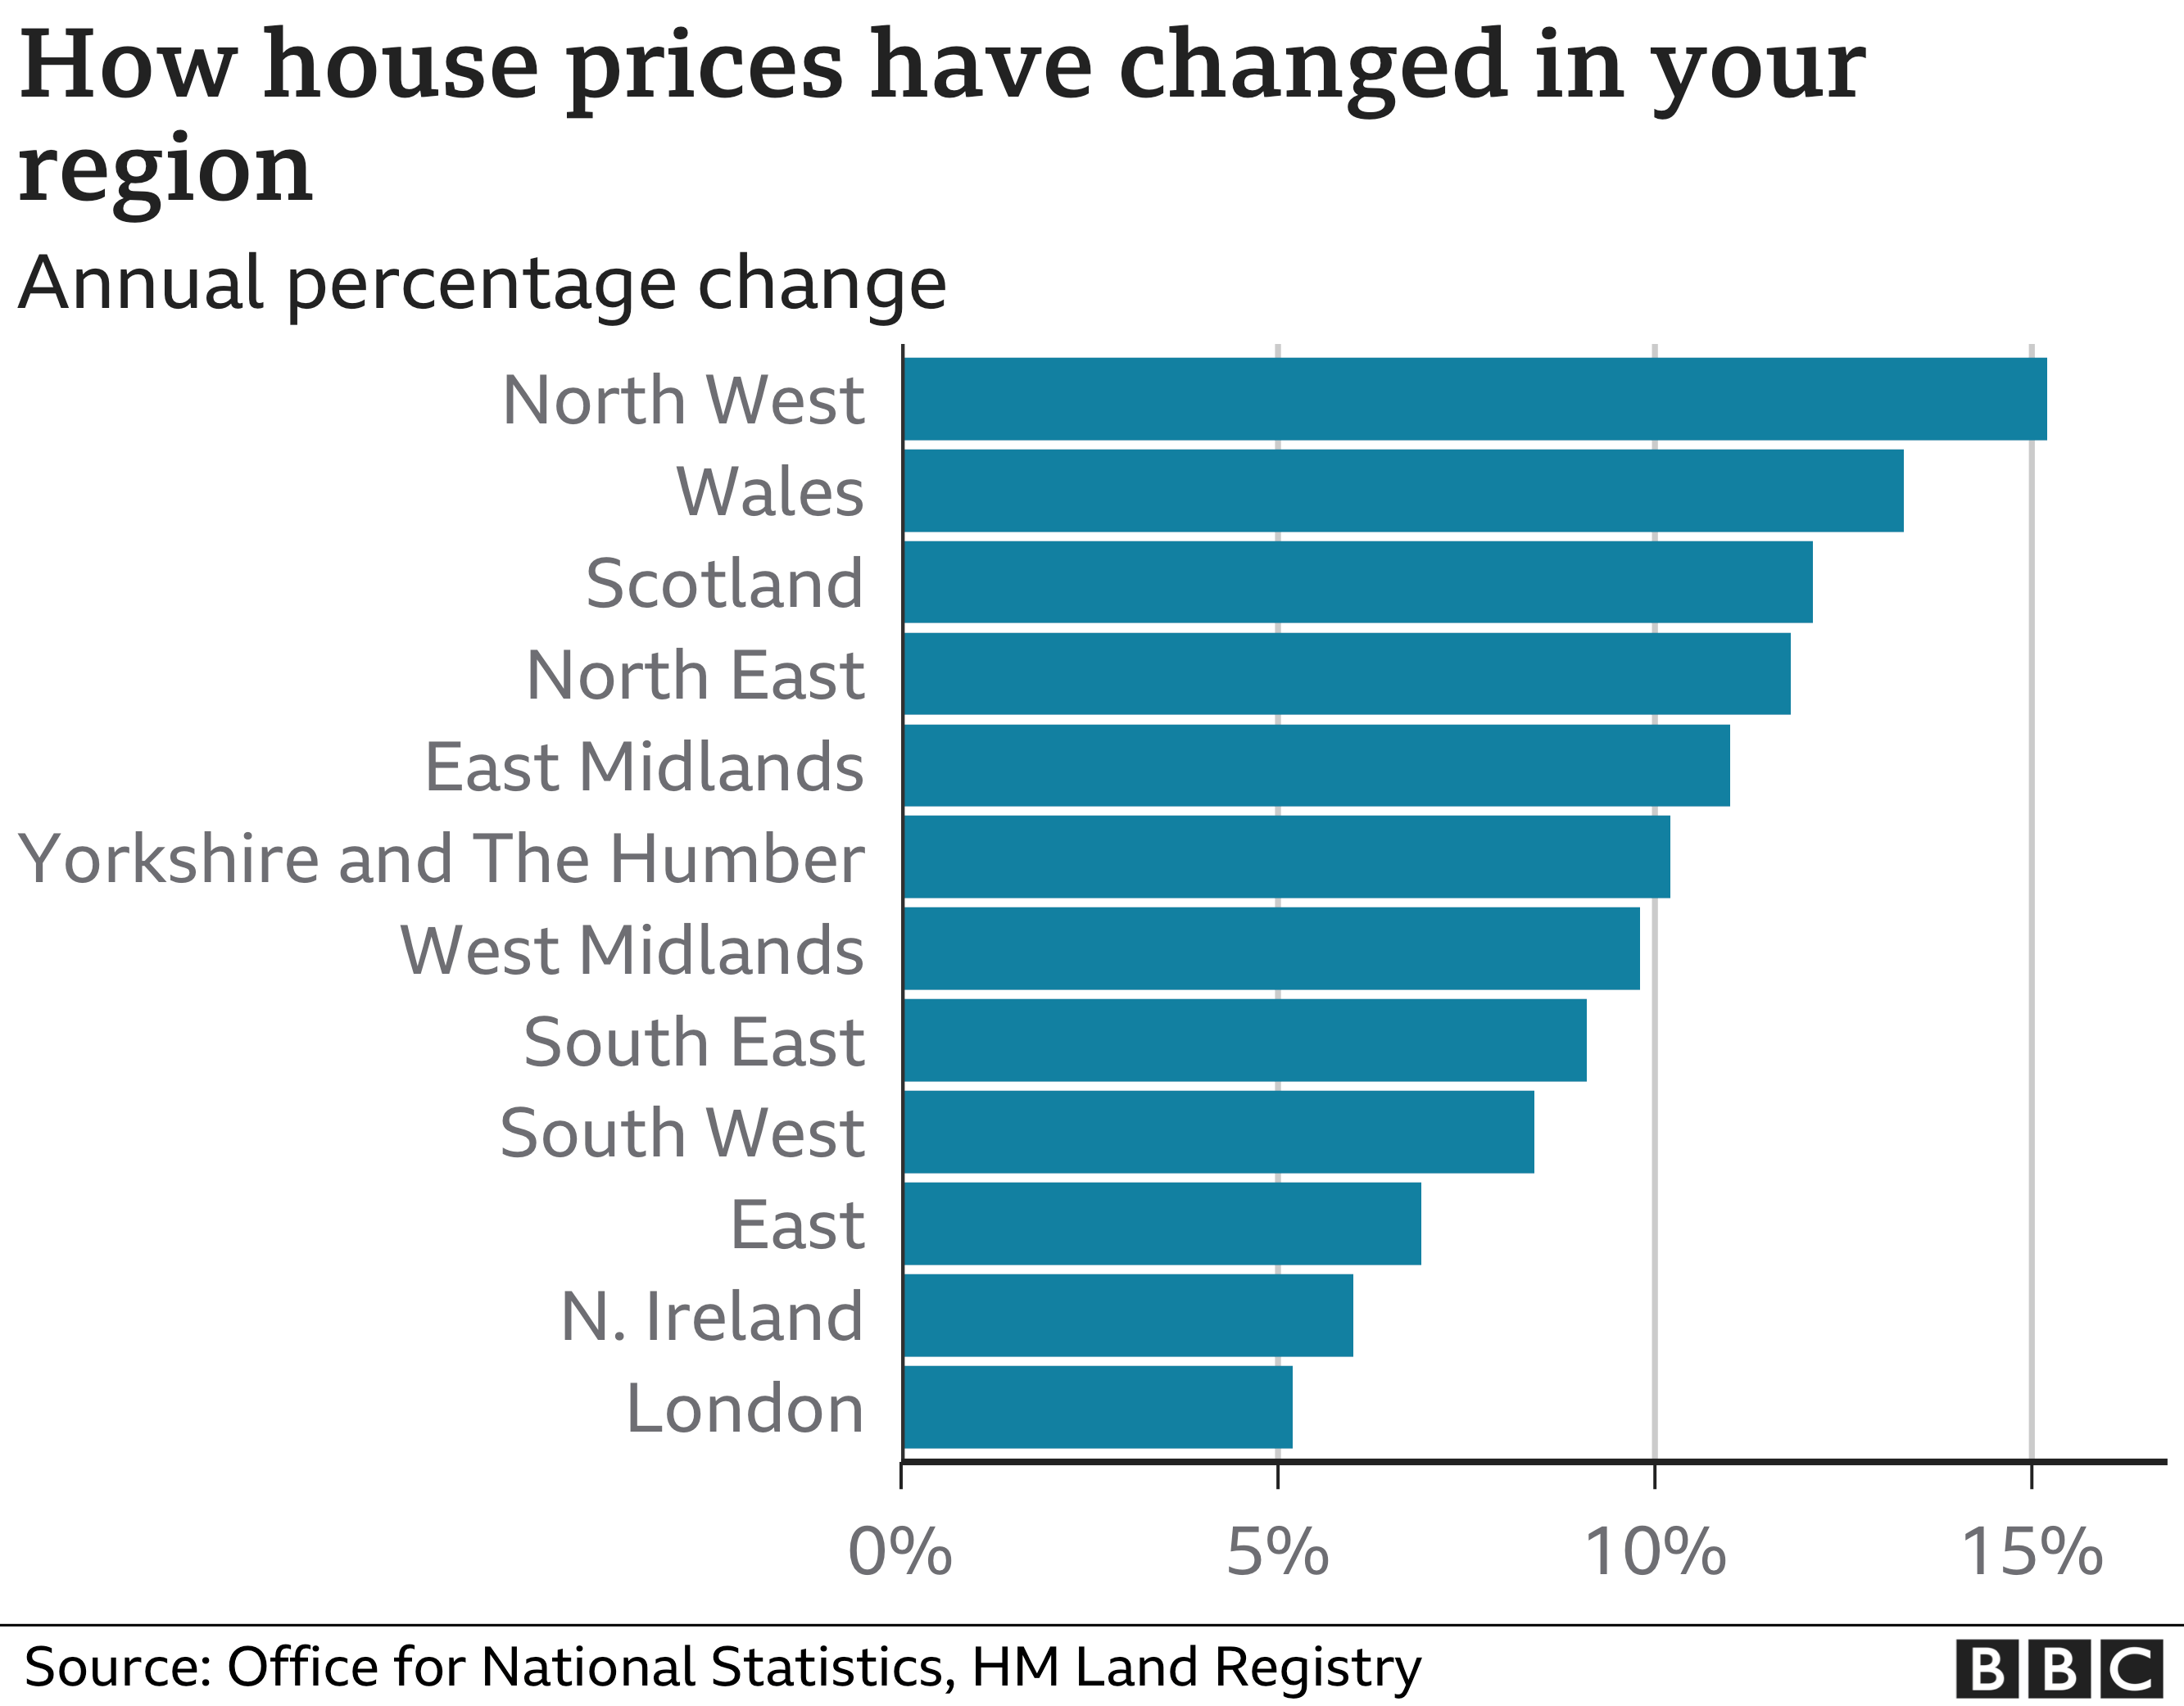 How house prices have changed in your region